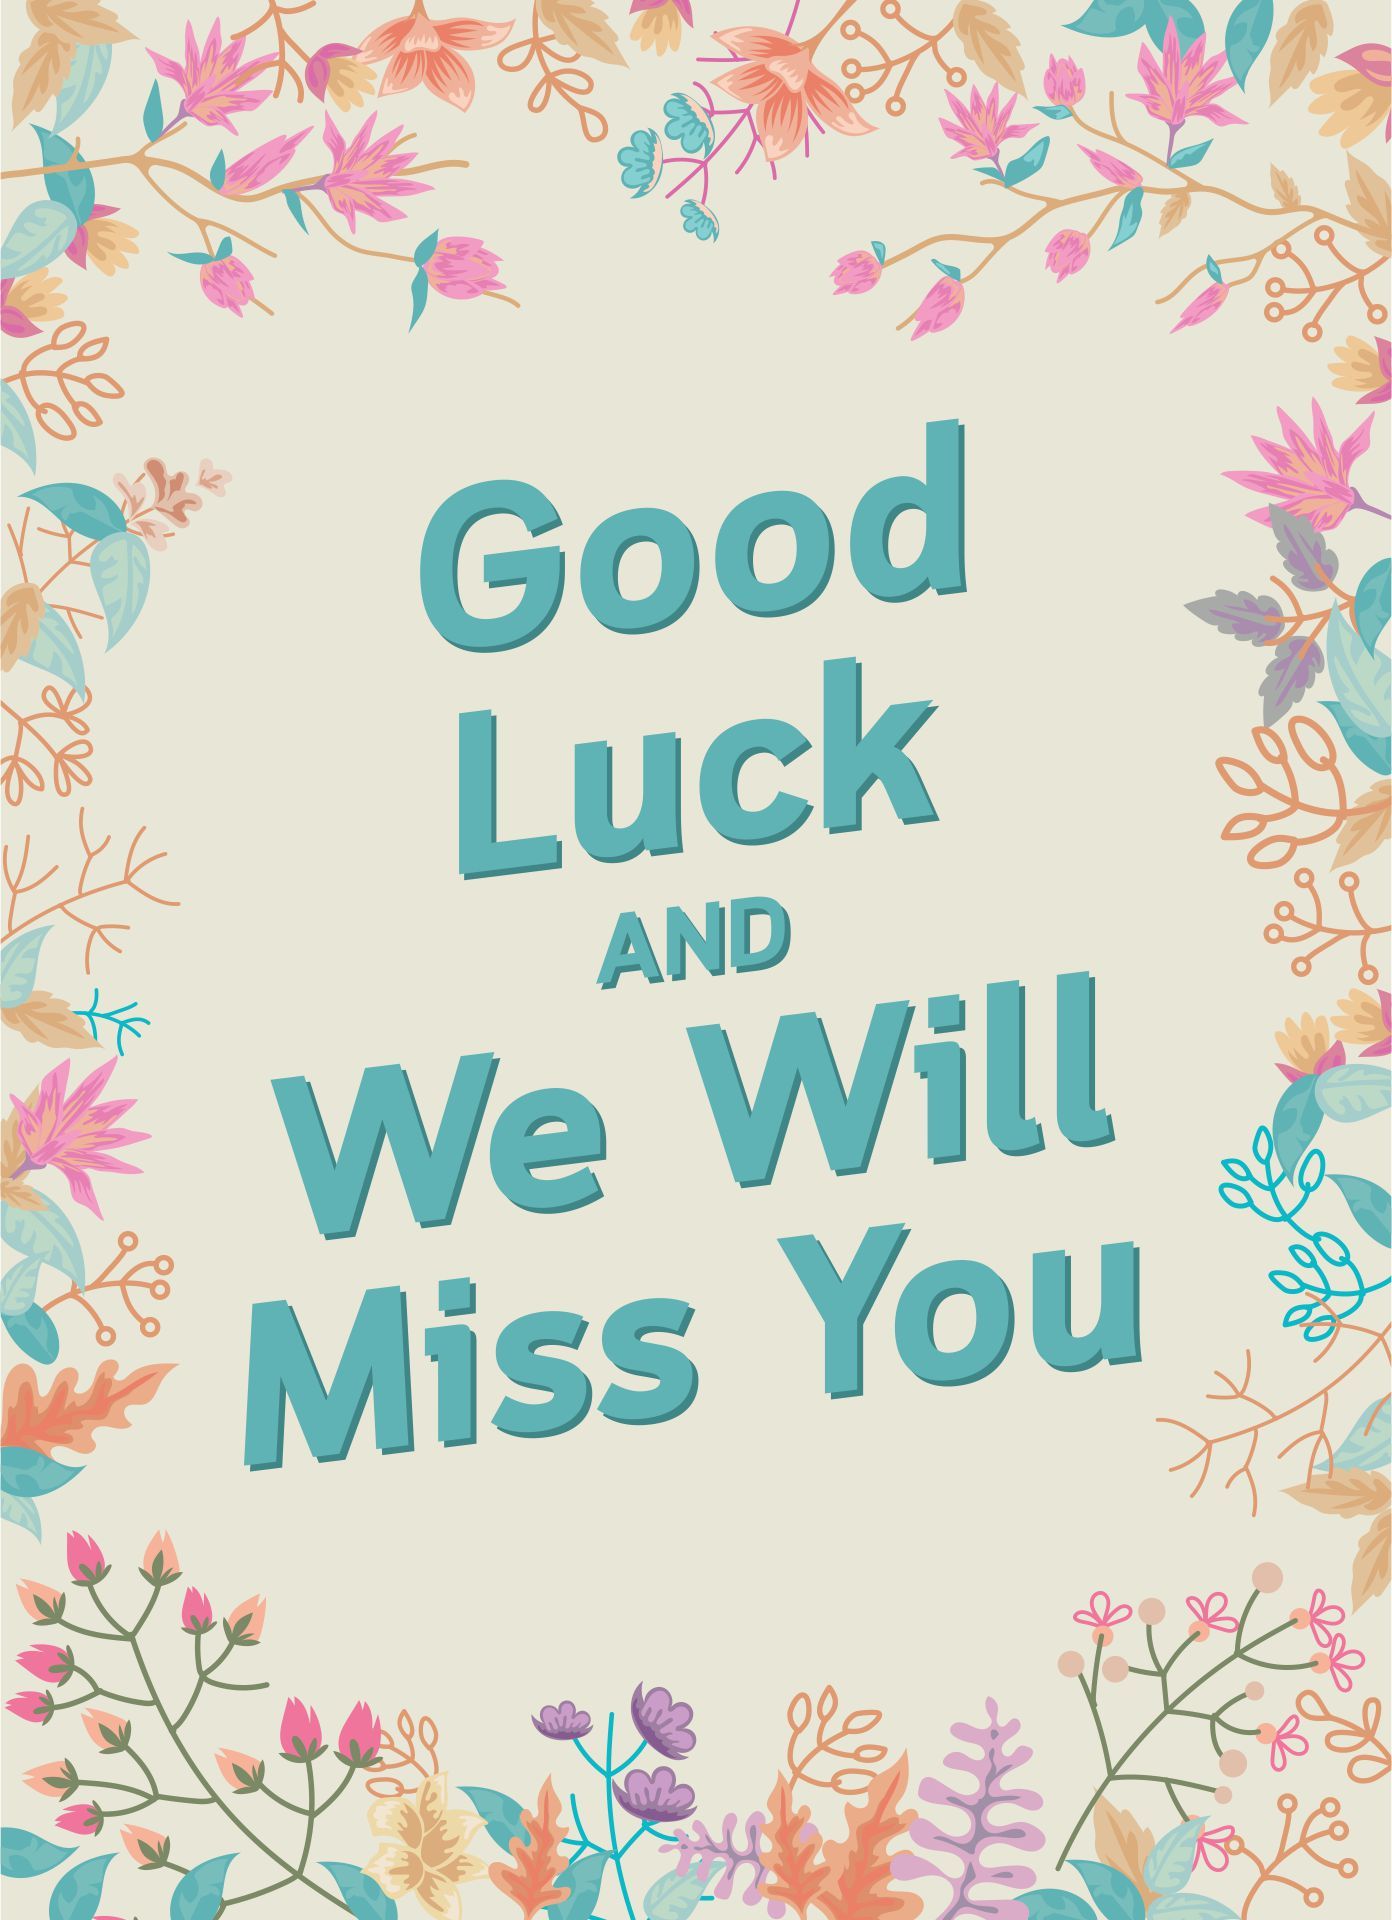 Best Good Bye Cards Printable. Goodbye and good luck, Printable cards, Miss you cards